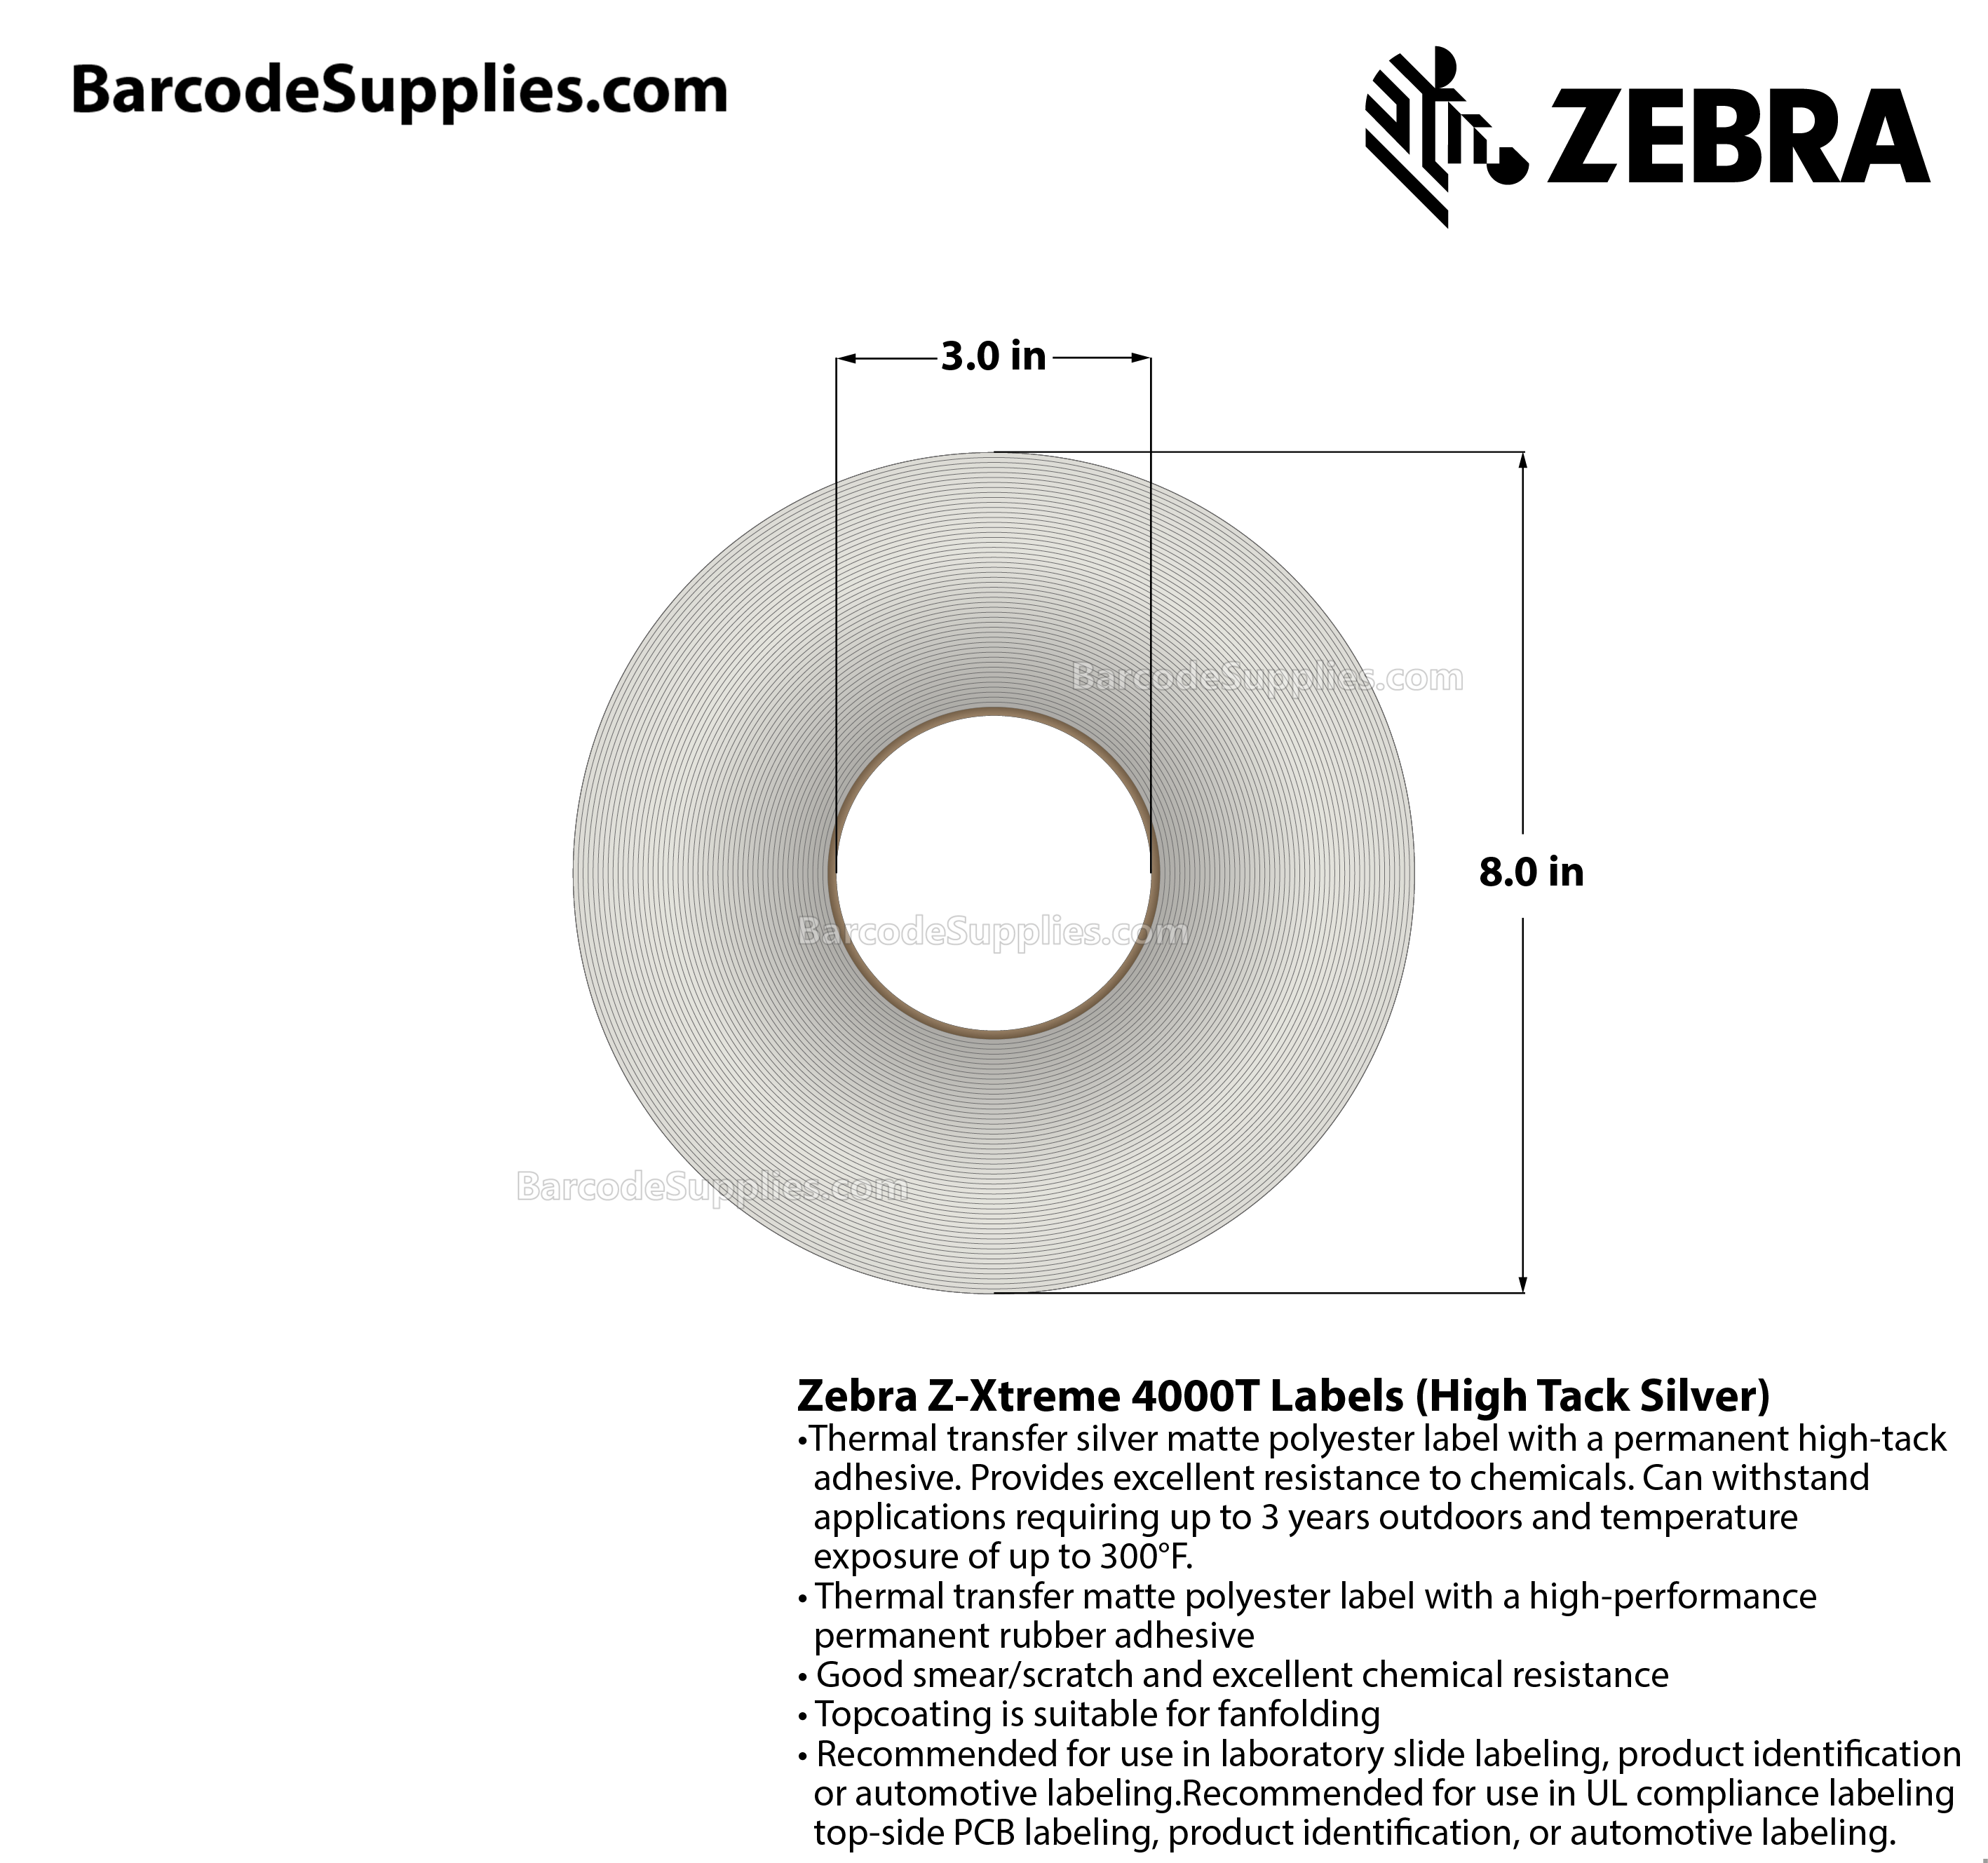 2 x 300' Thermal Transfer Silver Z-Xtreme 4000T High-Tack Silver Labels With High-tack Adhesive - Continuous - Labels Per Roll - Carton Of 1 Rolls - 0 Labels Total - MPN: 10023176